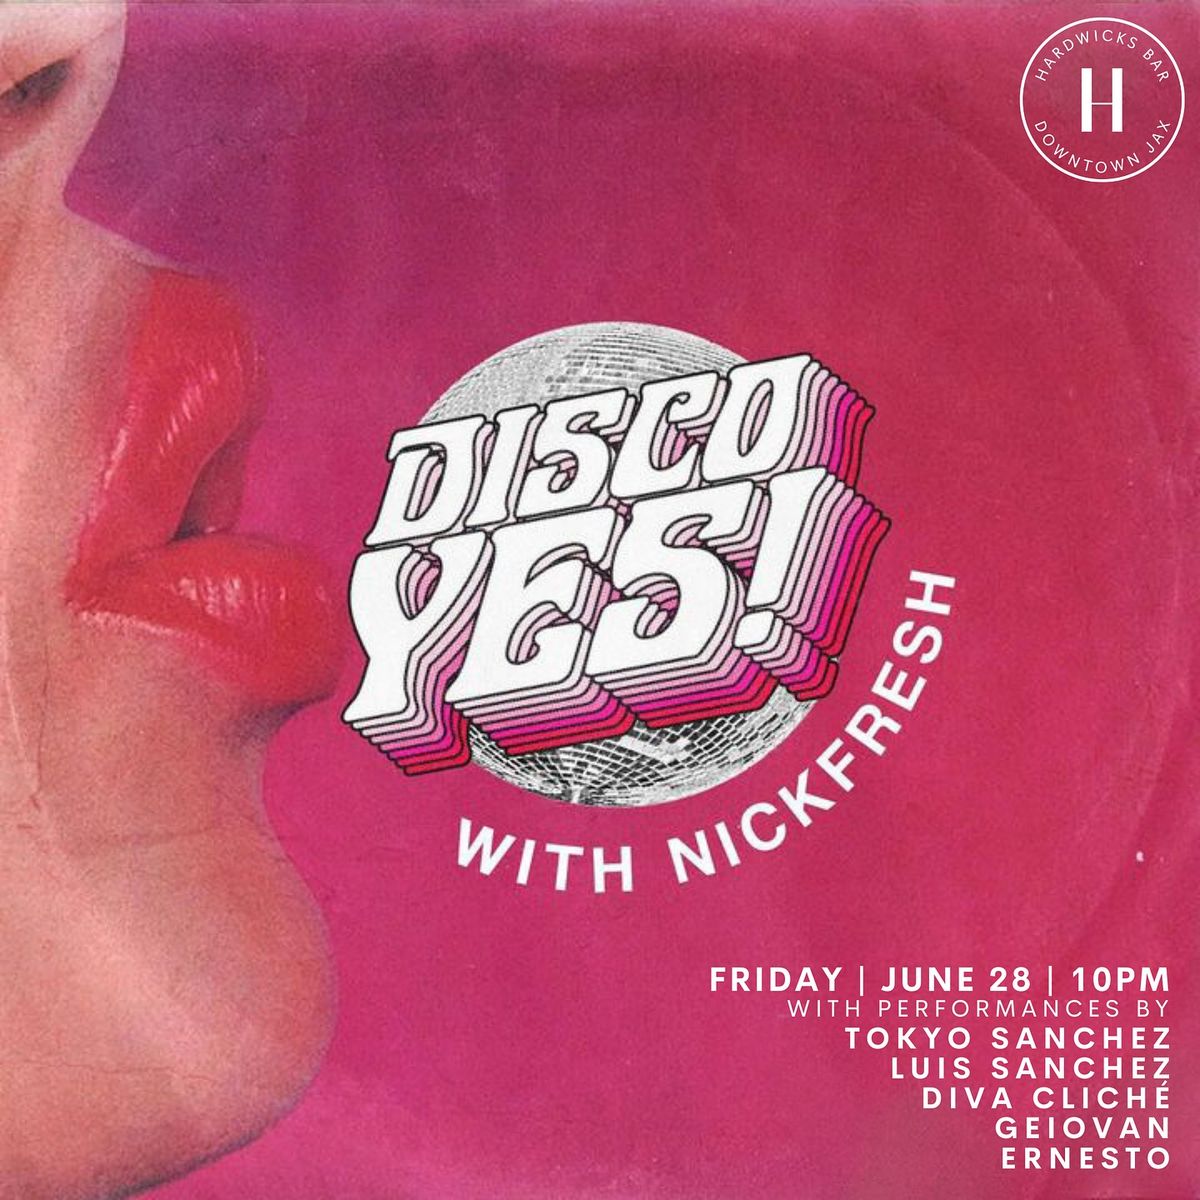 Disco YES! with NICKFRESH